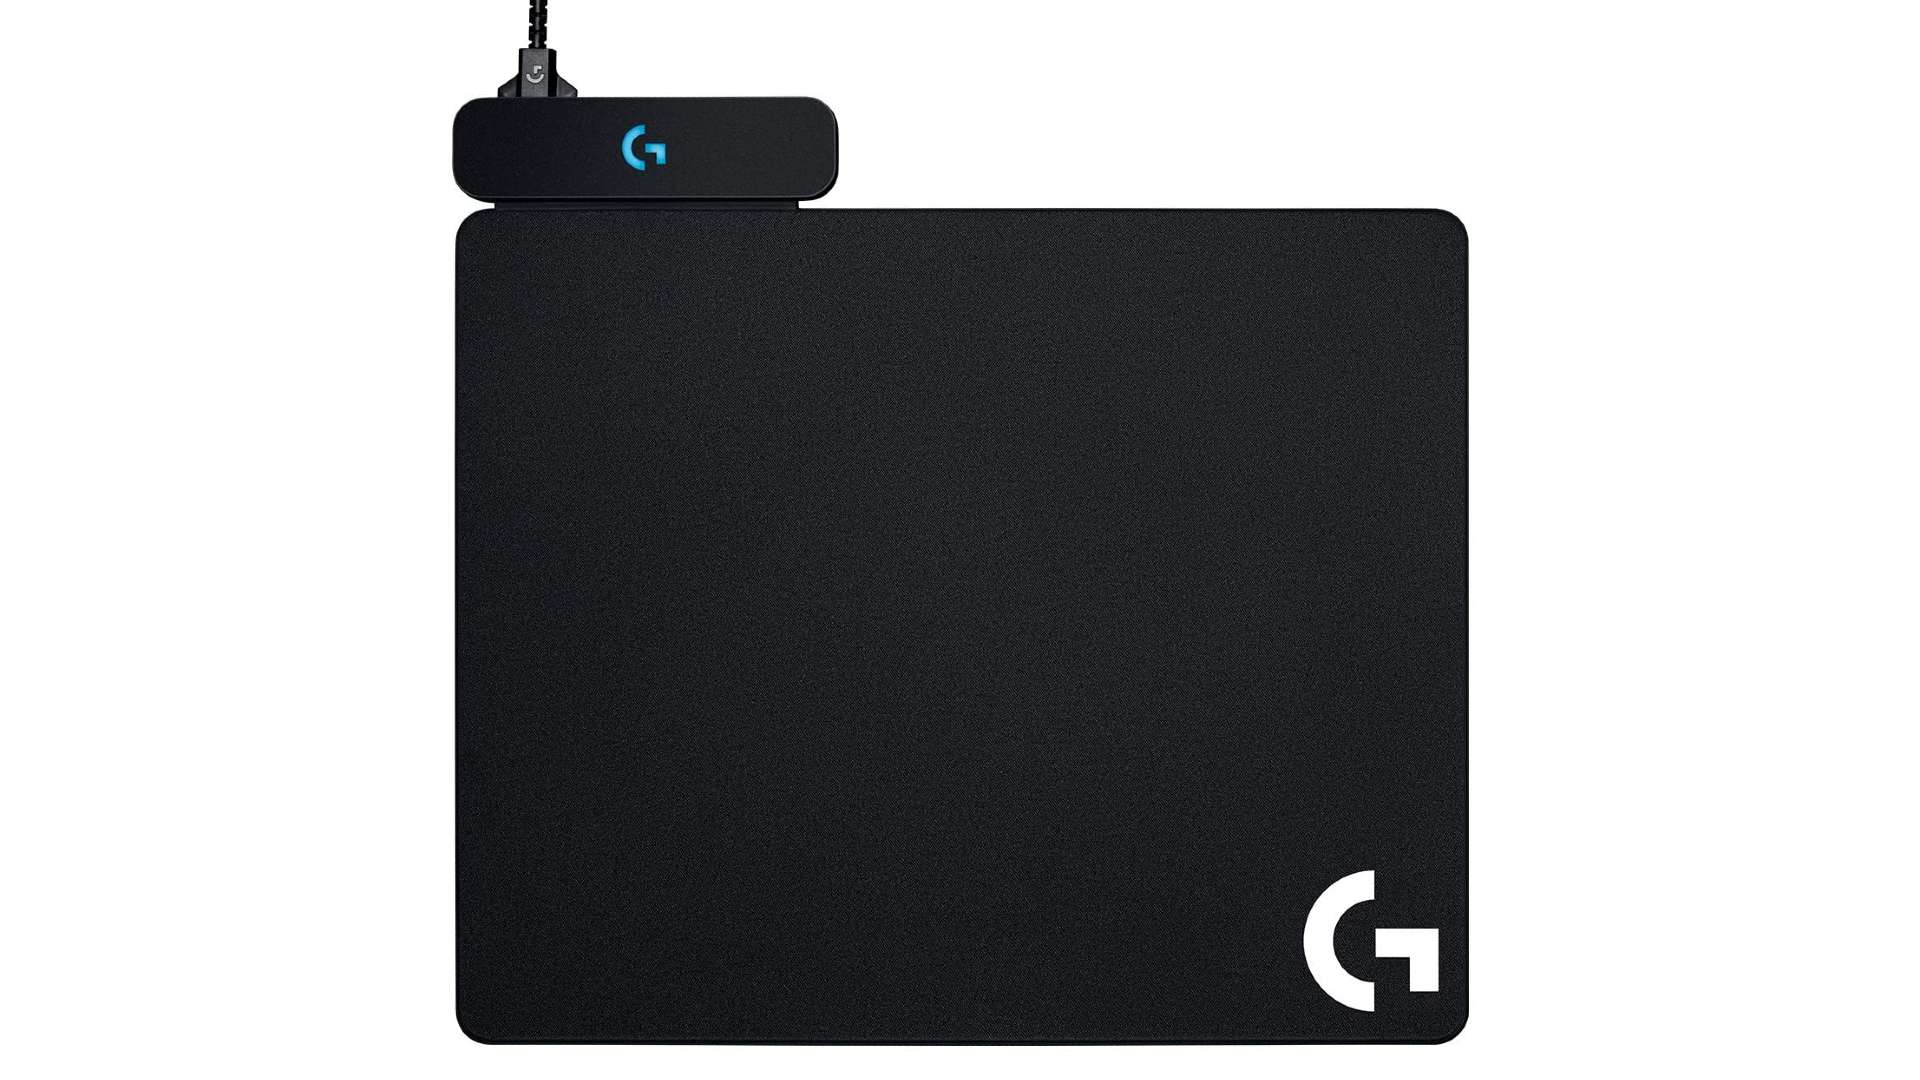 Black cloth mouse pad with wireless charger top left